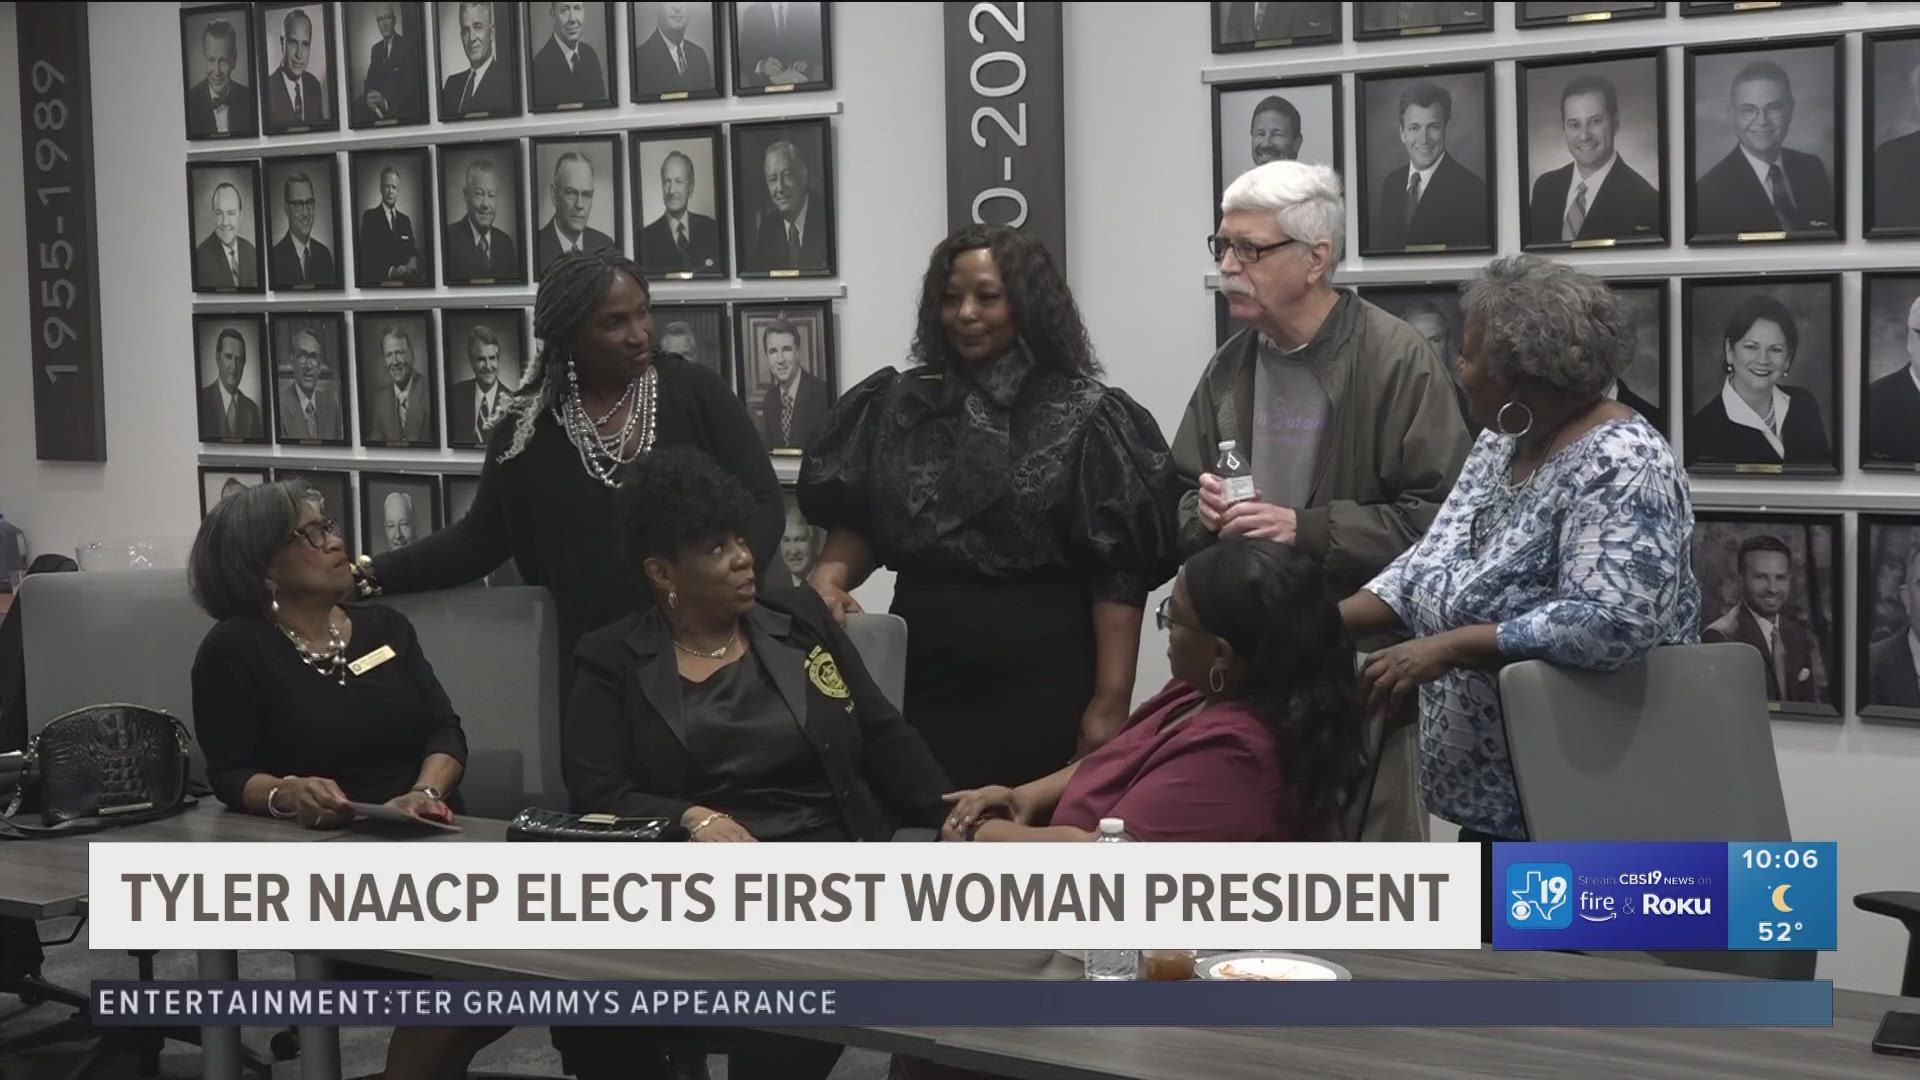 Tyler NAACP branch elects first woman president